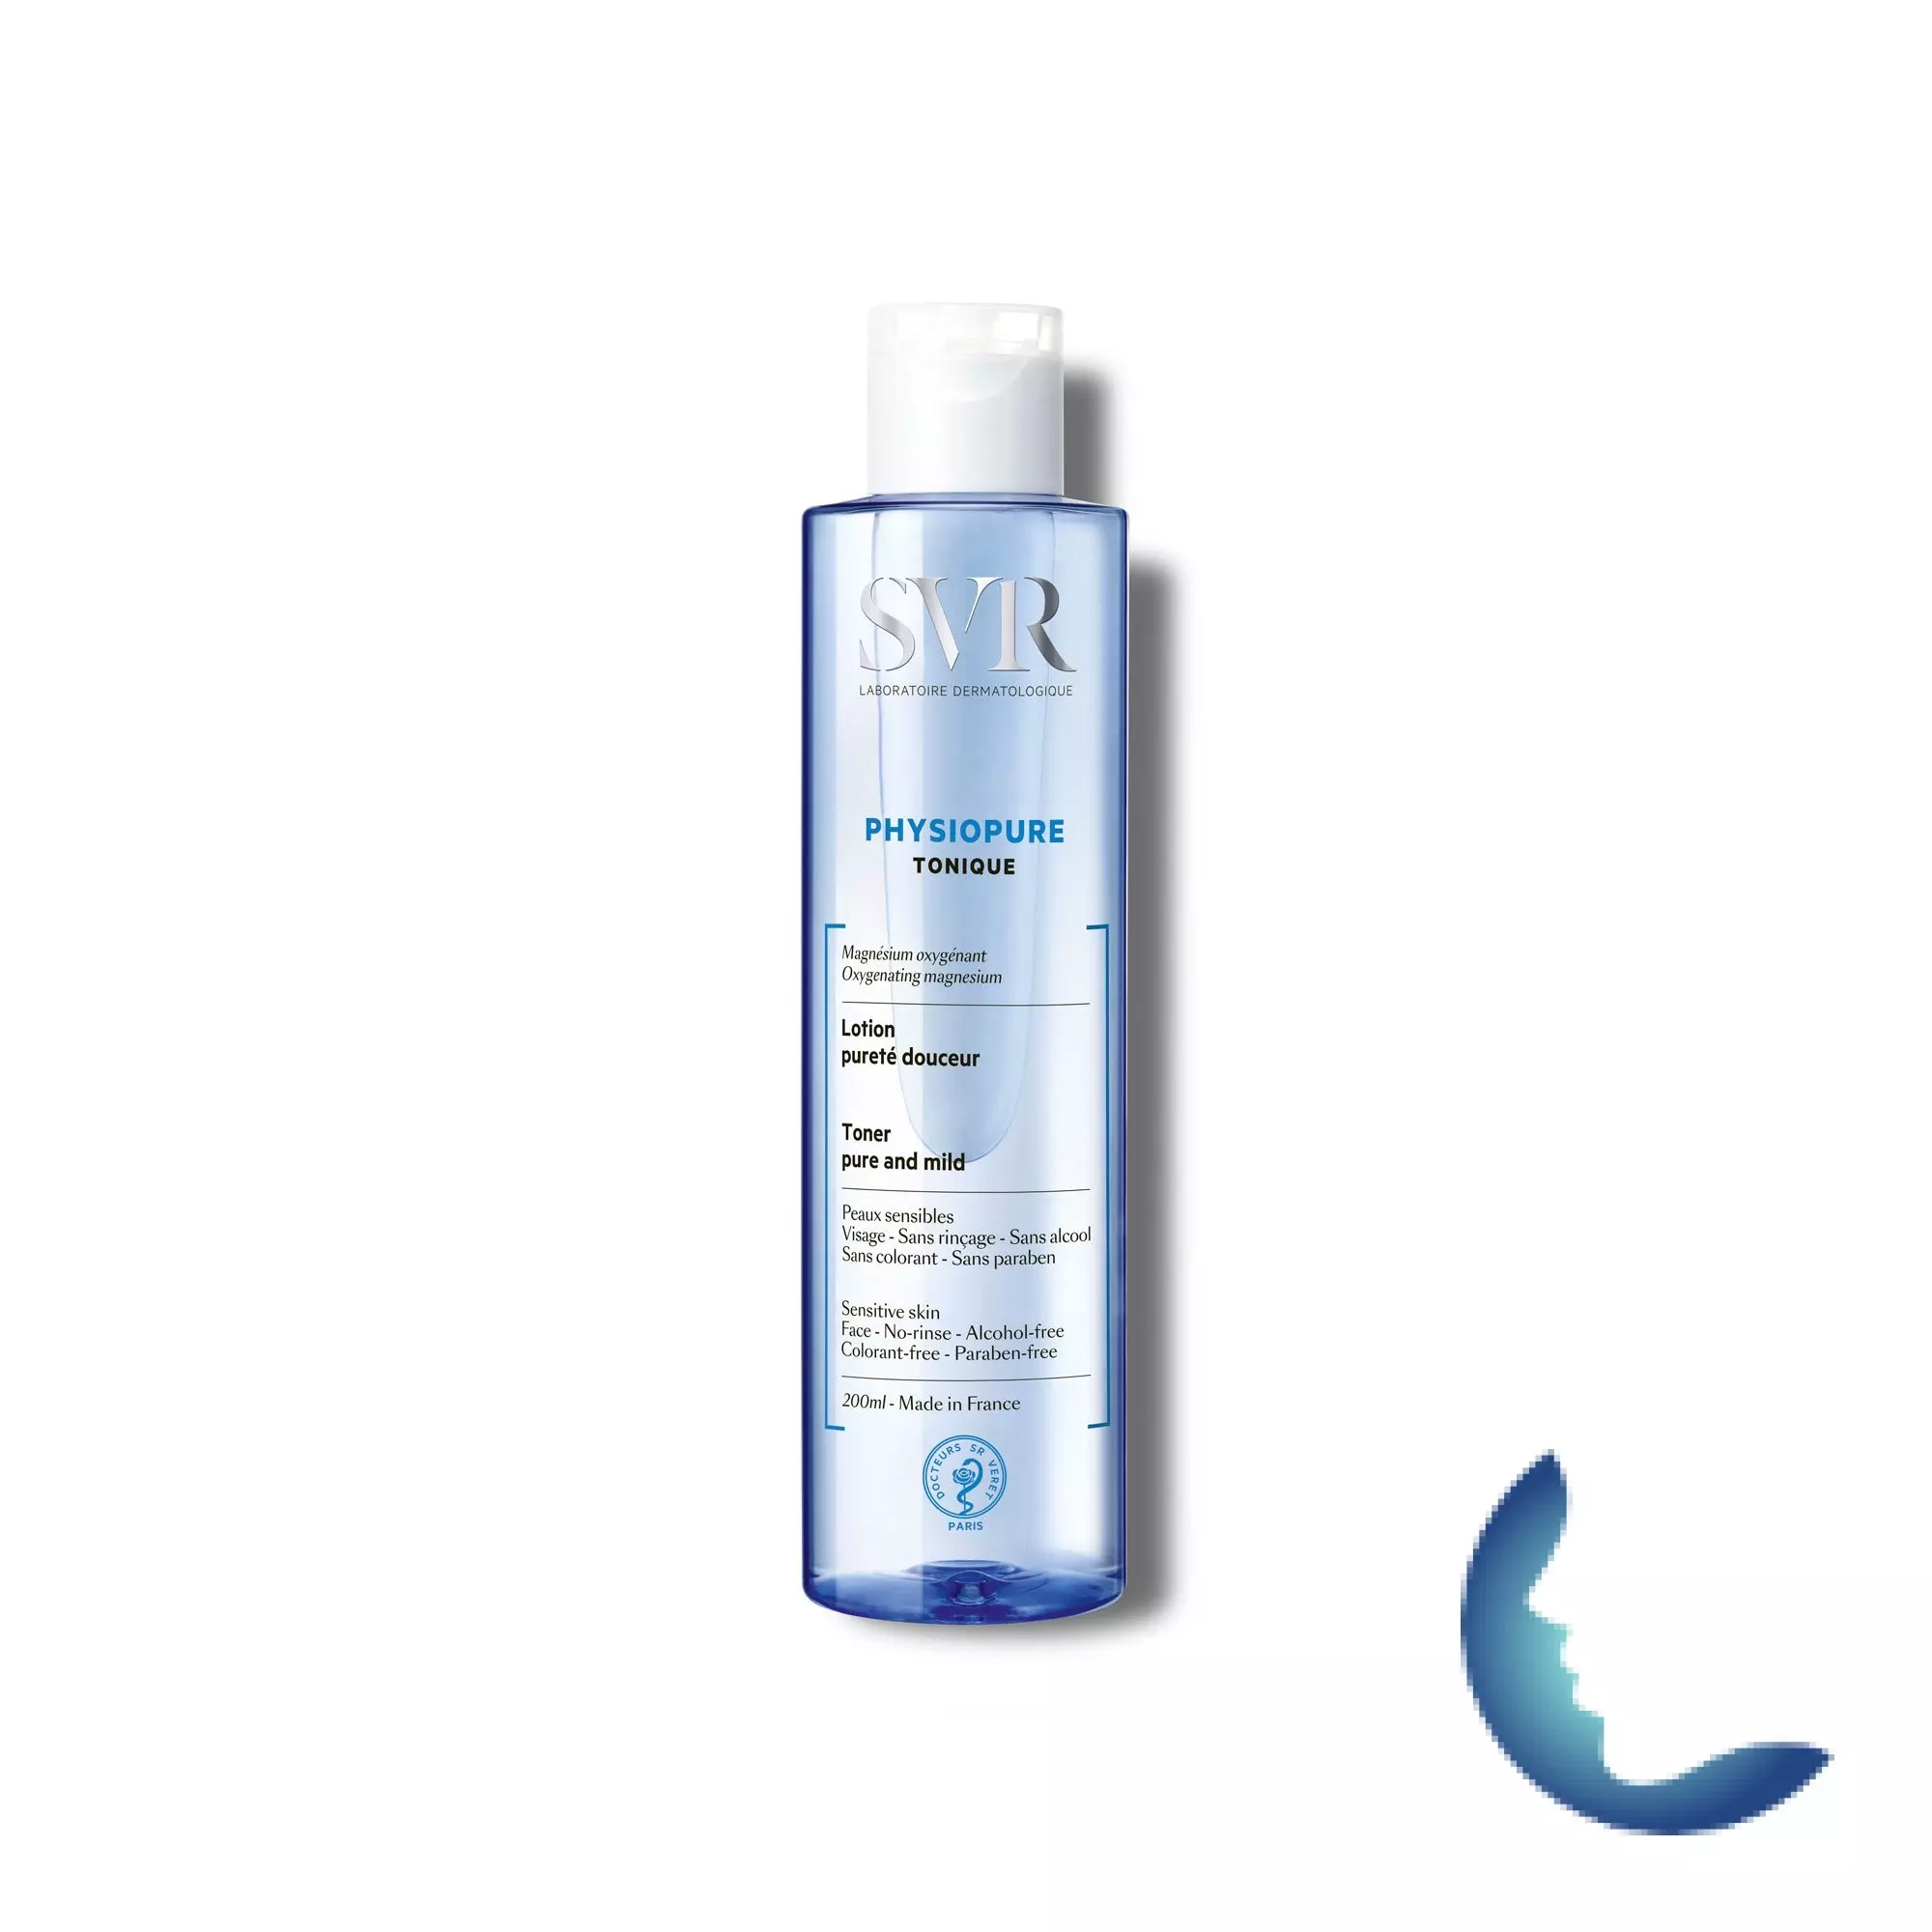 SVR Physiopure Lotion tonique, 200ml